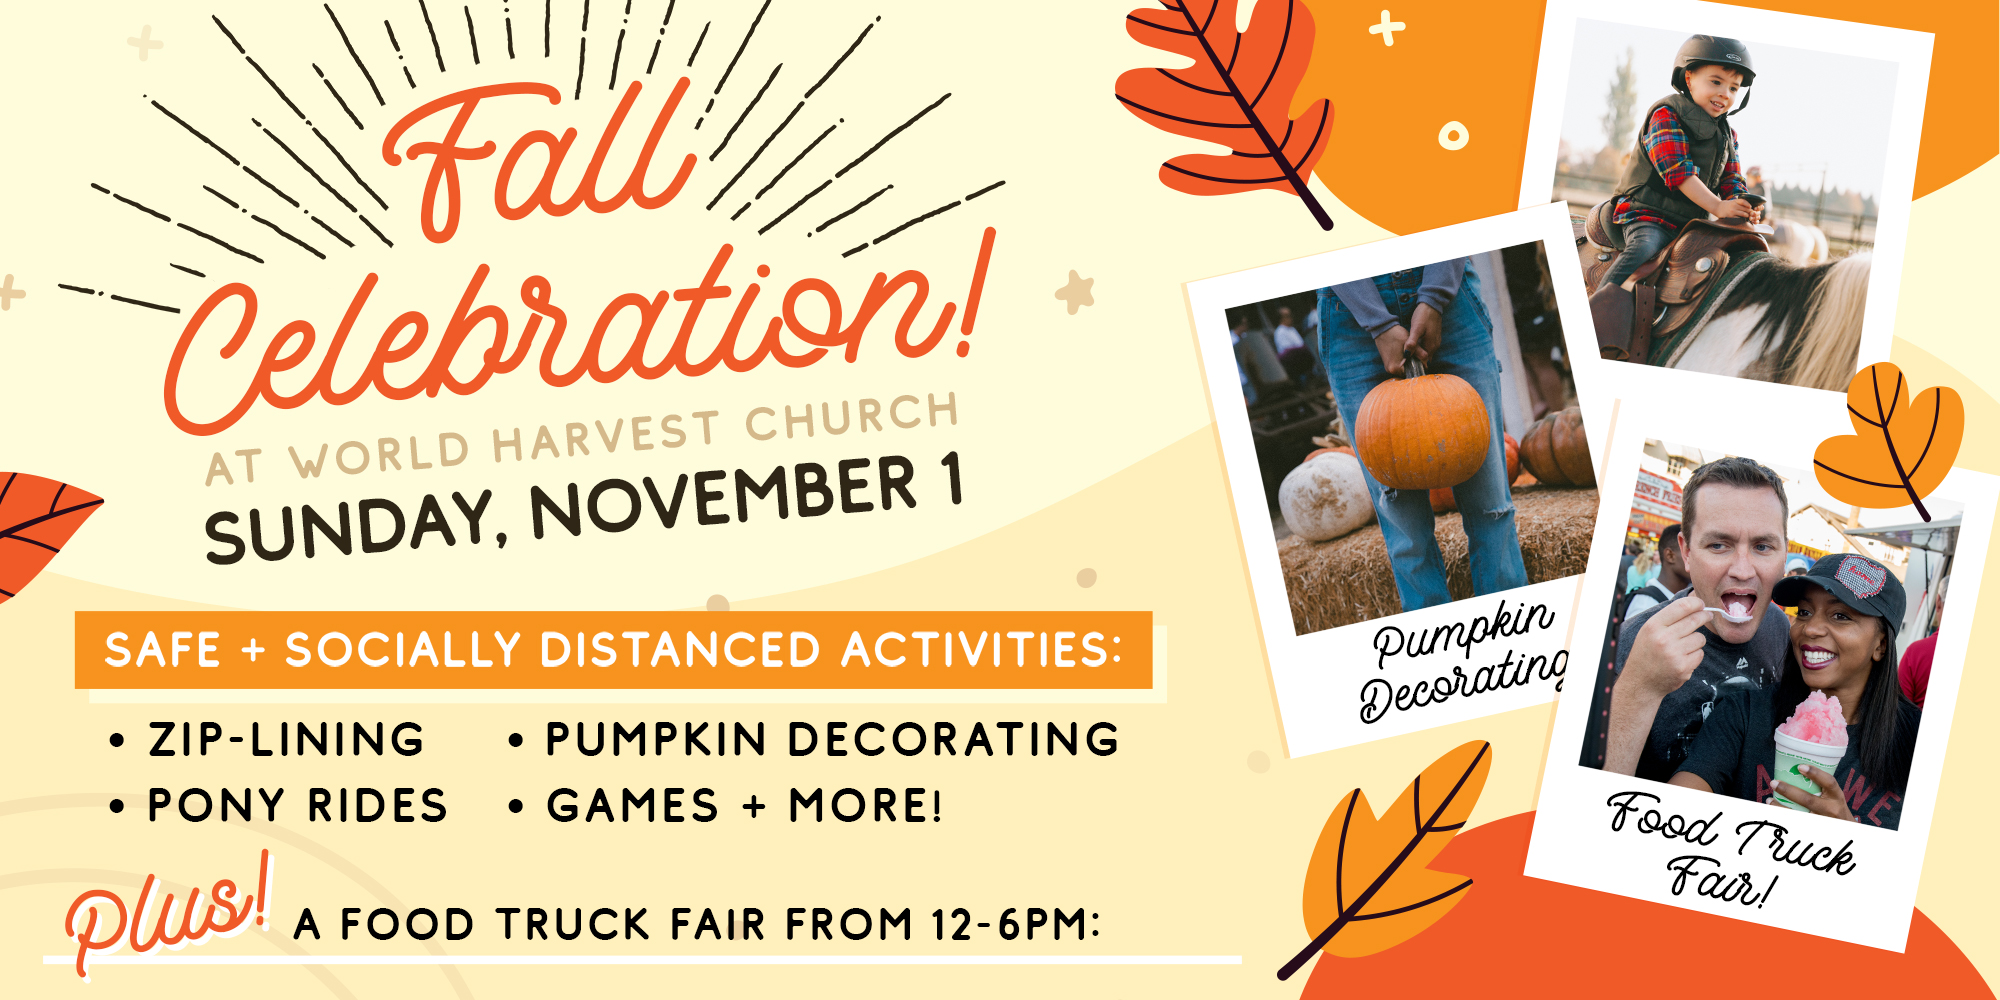 Fall Celebration! at World Harvest Church Sunday, November 1 Safe + Socially Distanced Activities: Zip-Lining Pumpkin Decorating Pony Rides Games + More! Plus A Food Truck Fair From 12-6PM